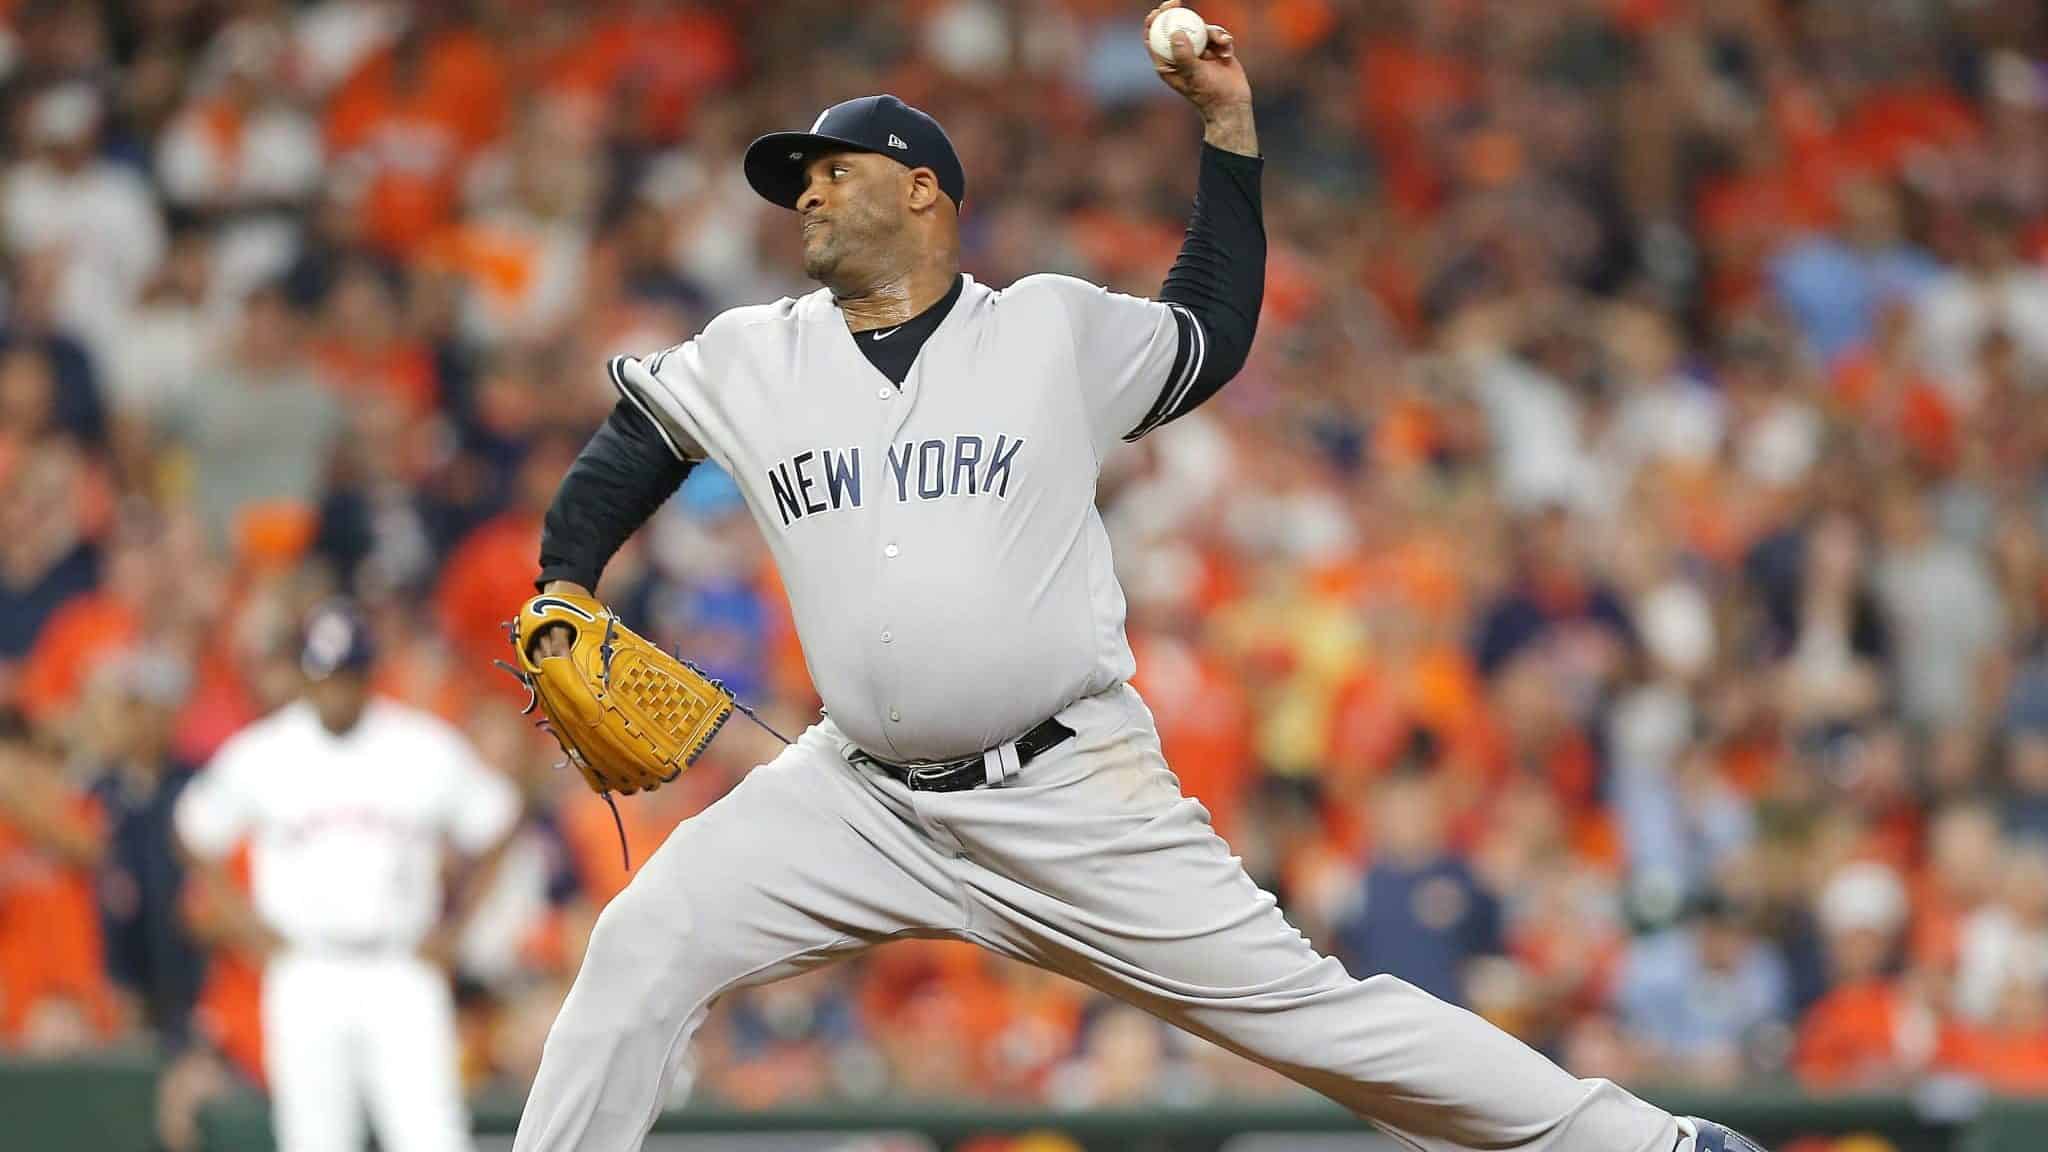 HOUSTON, TEXAS - OCTOBER 13: CC Sabathia #52 of the New York Yankees pitches during the tenth inning against the Houston Astros in game two of the American League Championship Series at Minute Maid Park on October 13, 2019 in Houston, Texas.